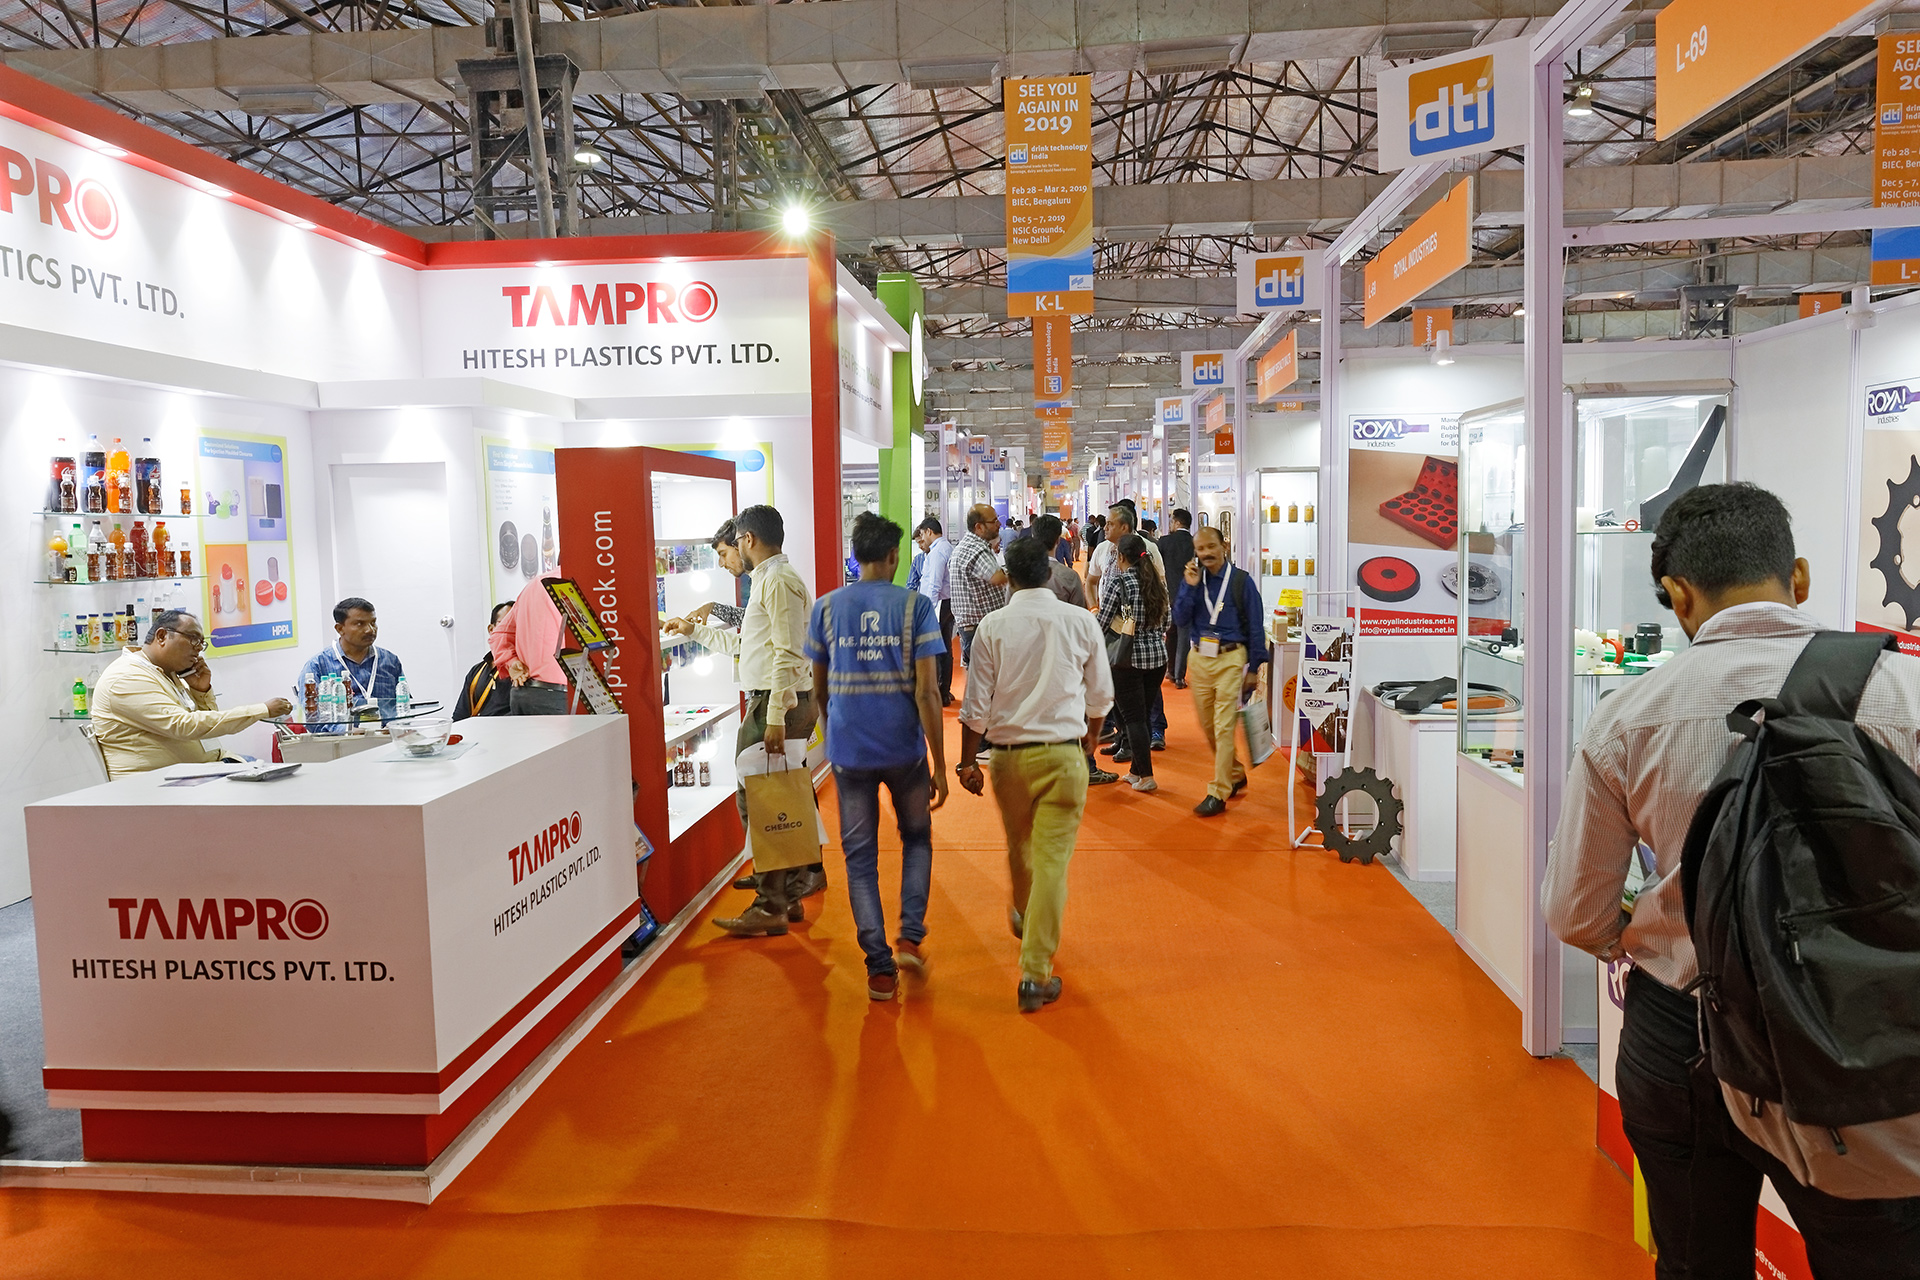 drink technology India 2018 underscores its position as the key event for the beverage and liquid food industry in India